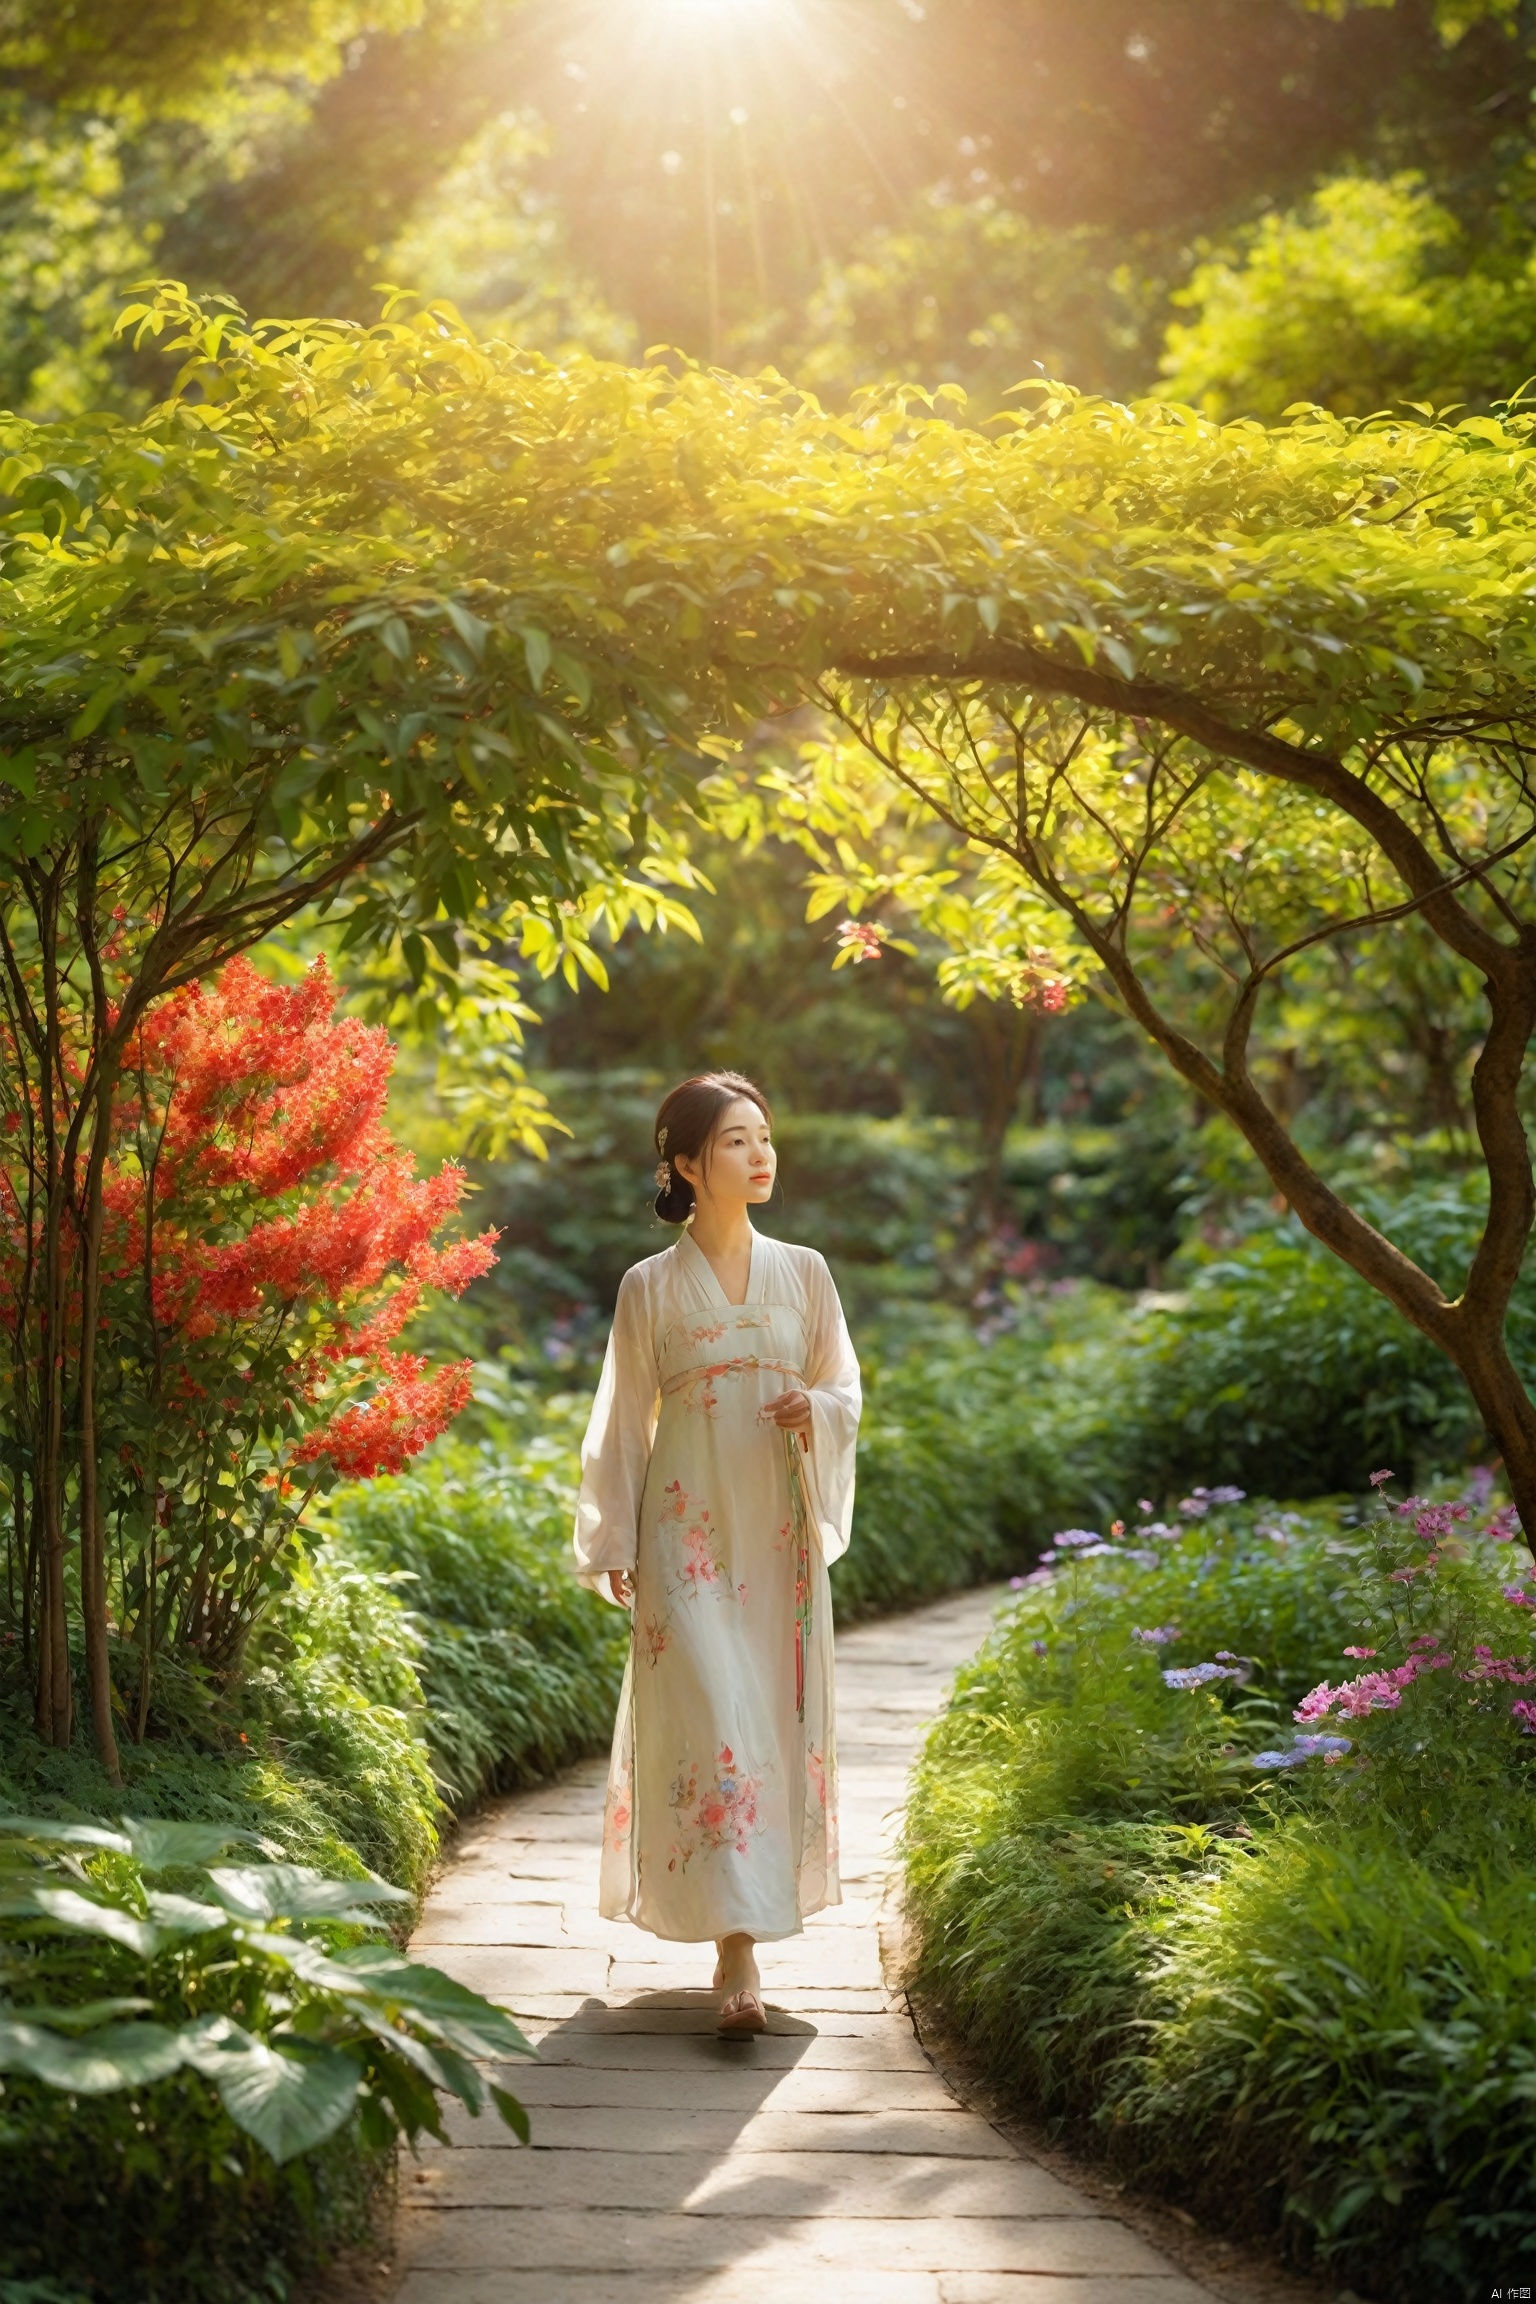  A young Chinese woman walks along a winding path in a botanical garden, her eyes taking in the vibrant colors of the flowers and the intricate patterns of the leaves. The sun filters through the canopy, casting a dappled light on her path. She moves with a sense of contentment, her mind at ease, as if in harmony with the natural world. The scene is a peaceful journey, a stroll through the beauty of nature.